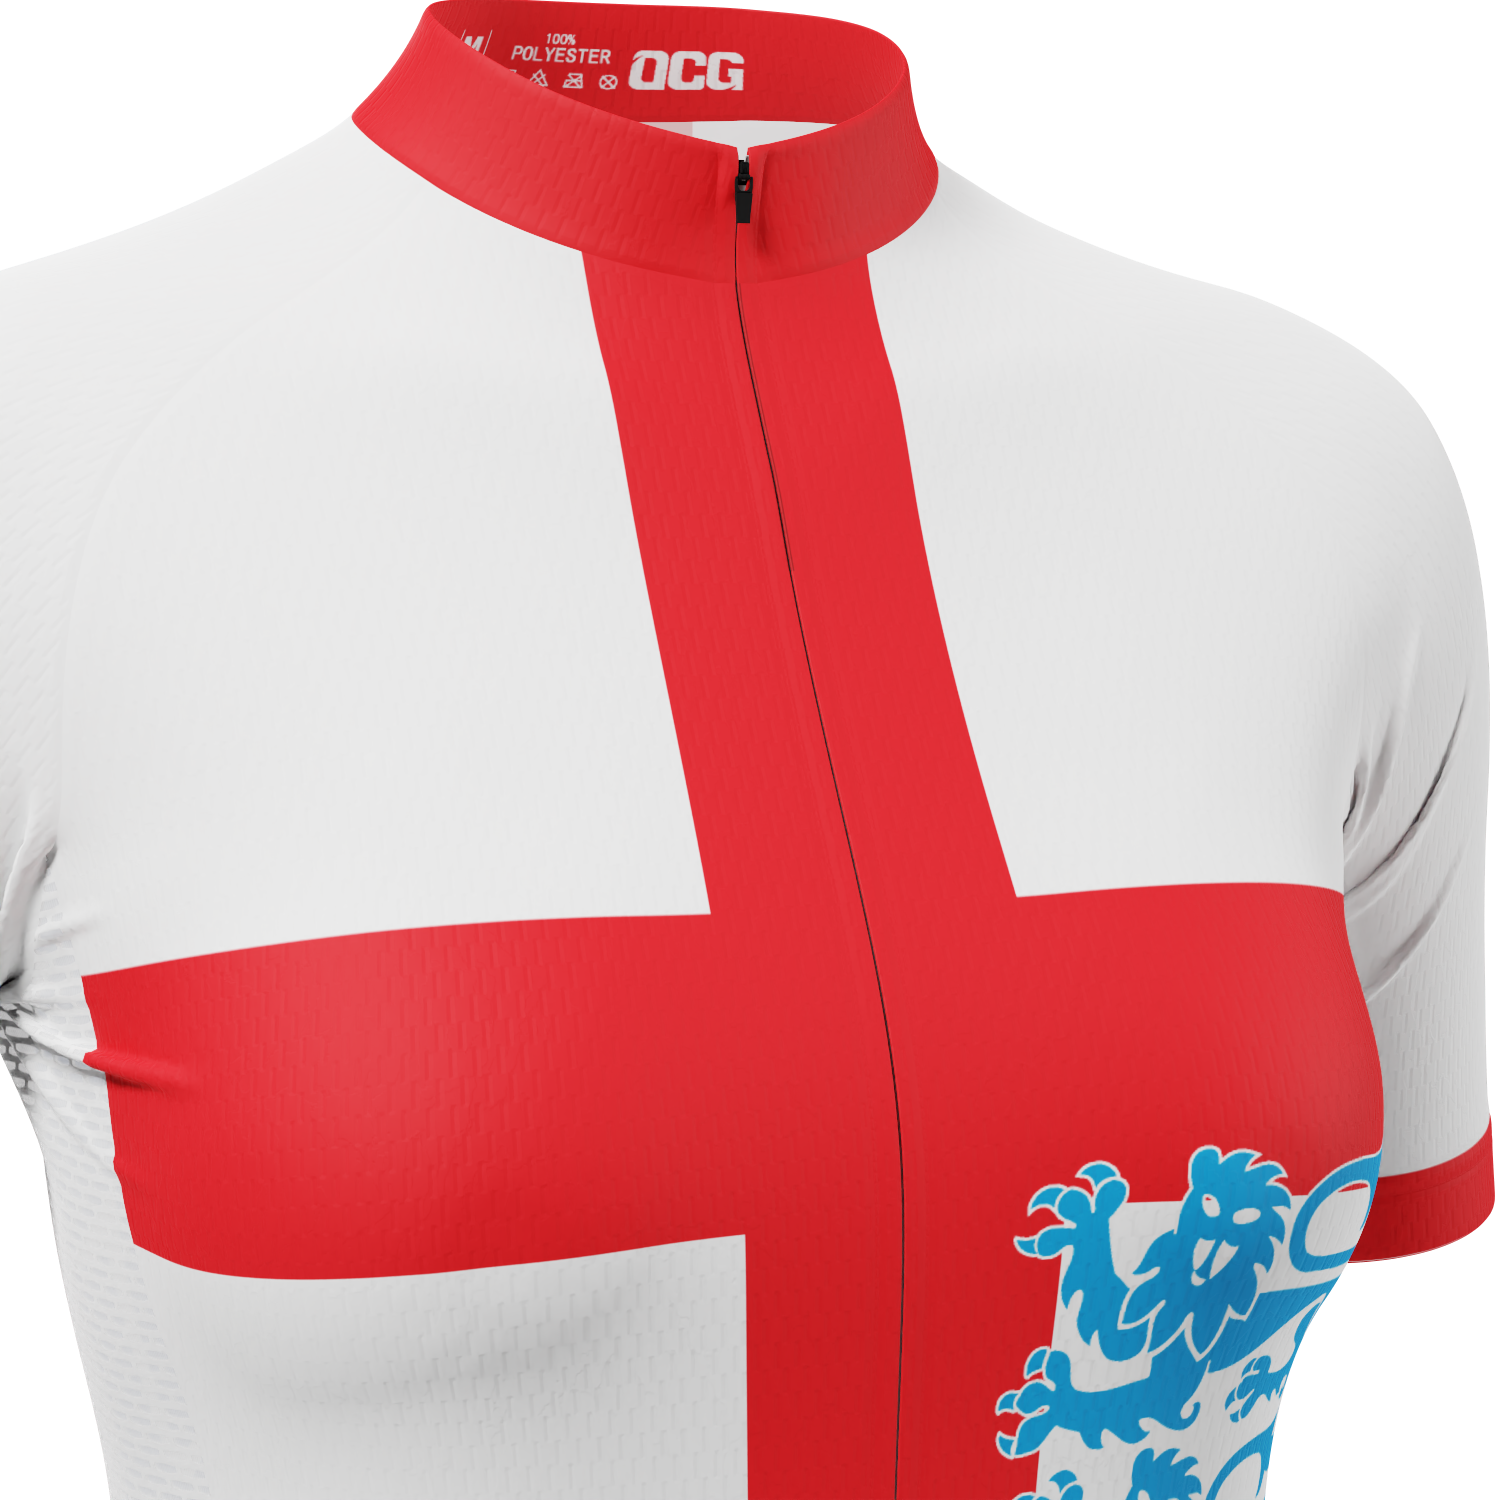 Women's Three Lions England National Flag Short Sleeve Cycling Jersey